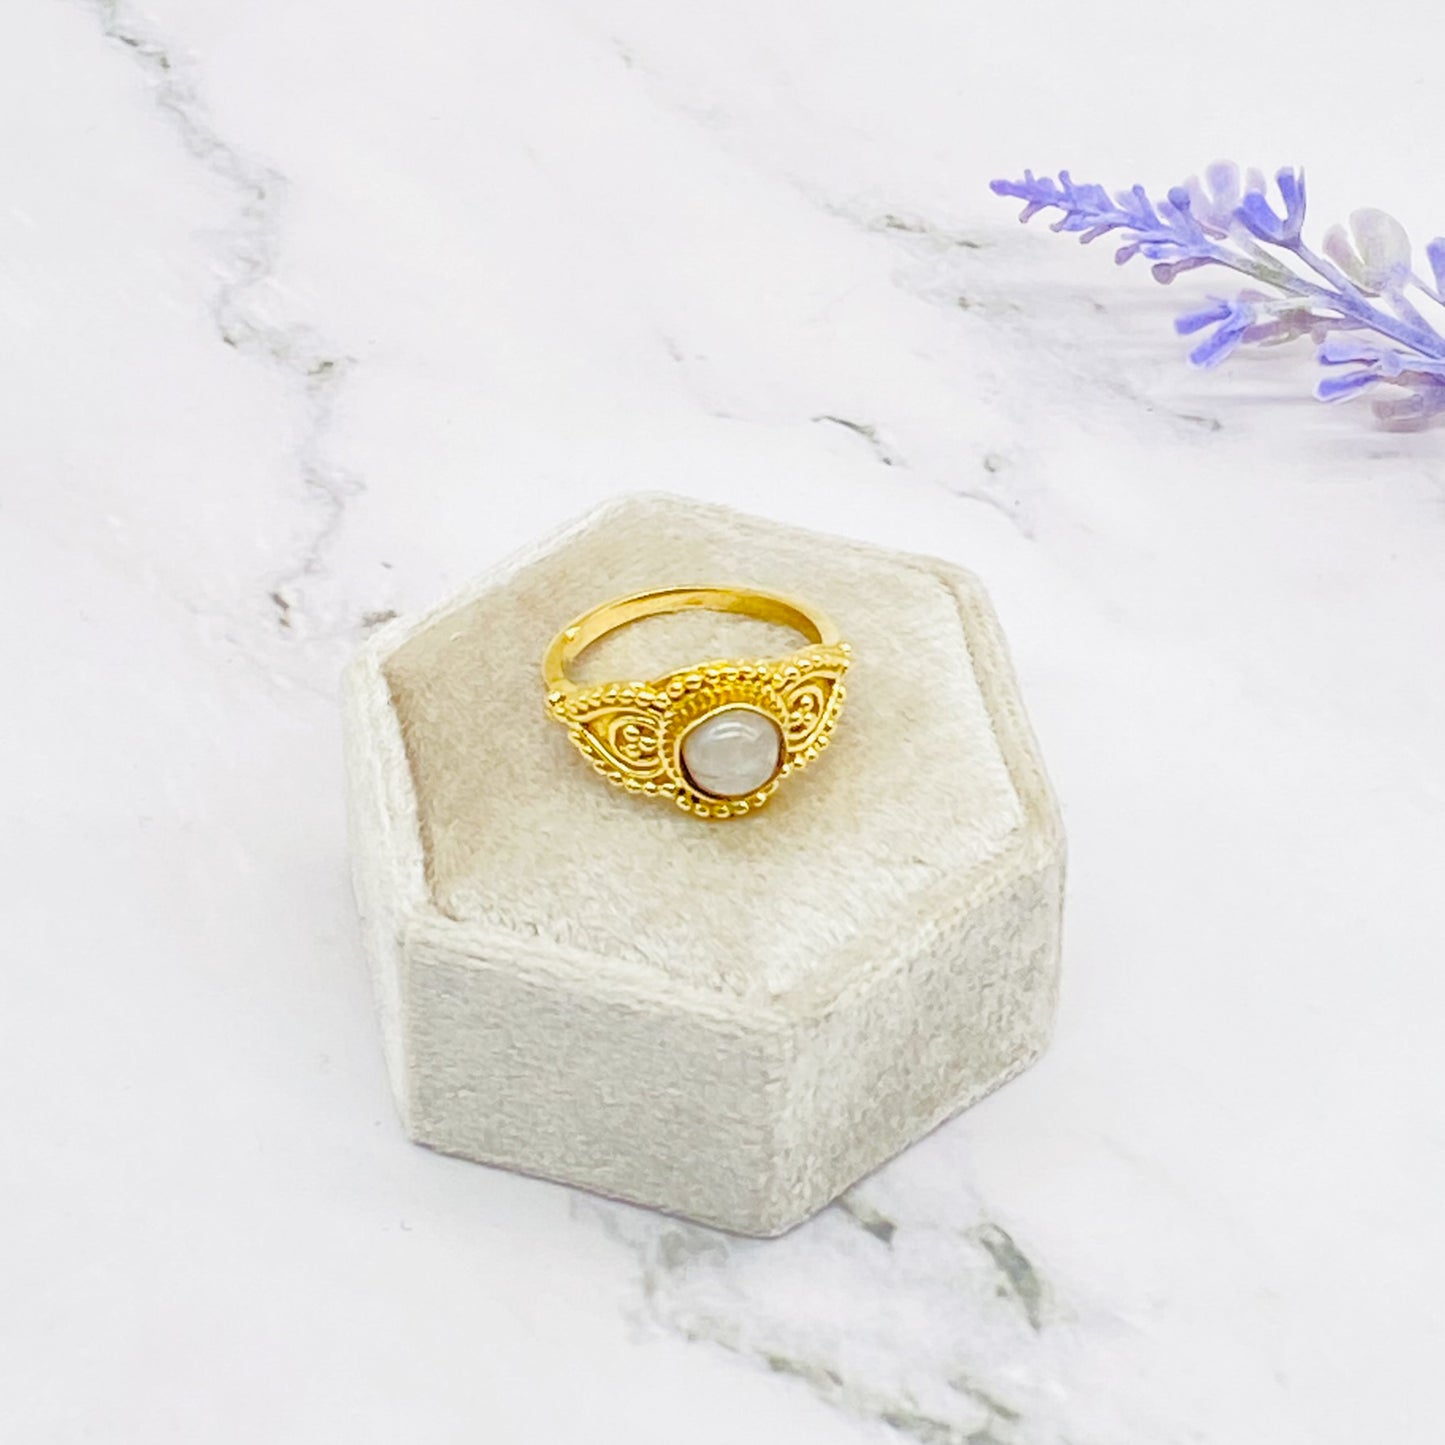 Gold Filled Crystal Ring, Handmade Ring, Statement Jewelry, Bohemian Ring, Gift For Her, Gemstone Ring, Healing Crystals